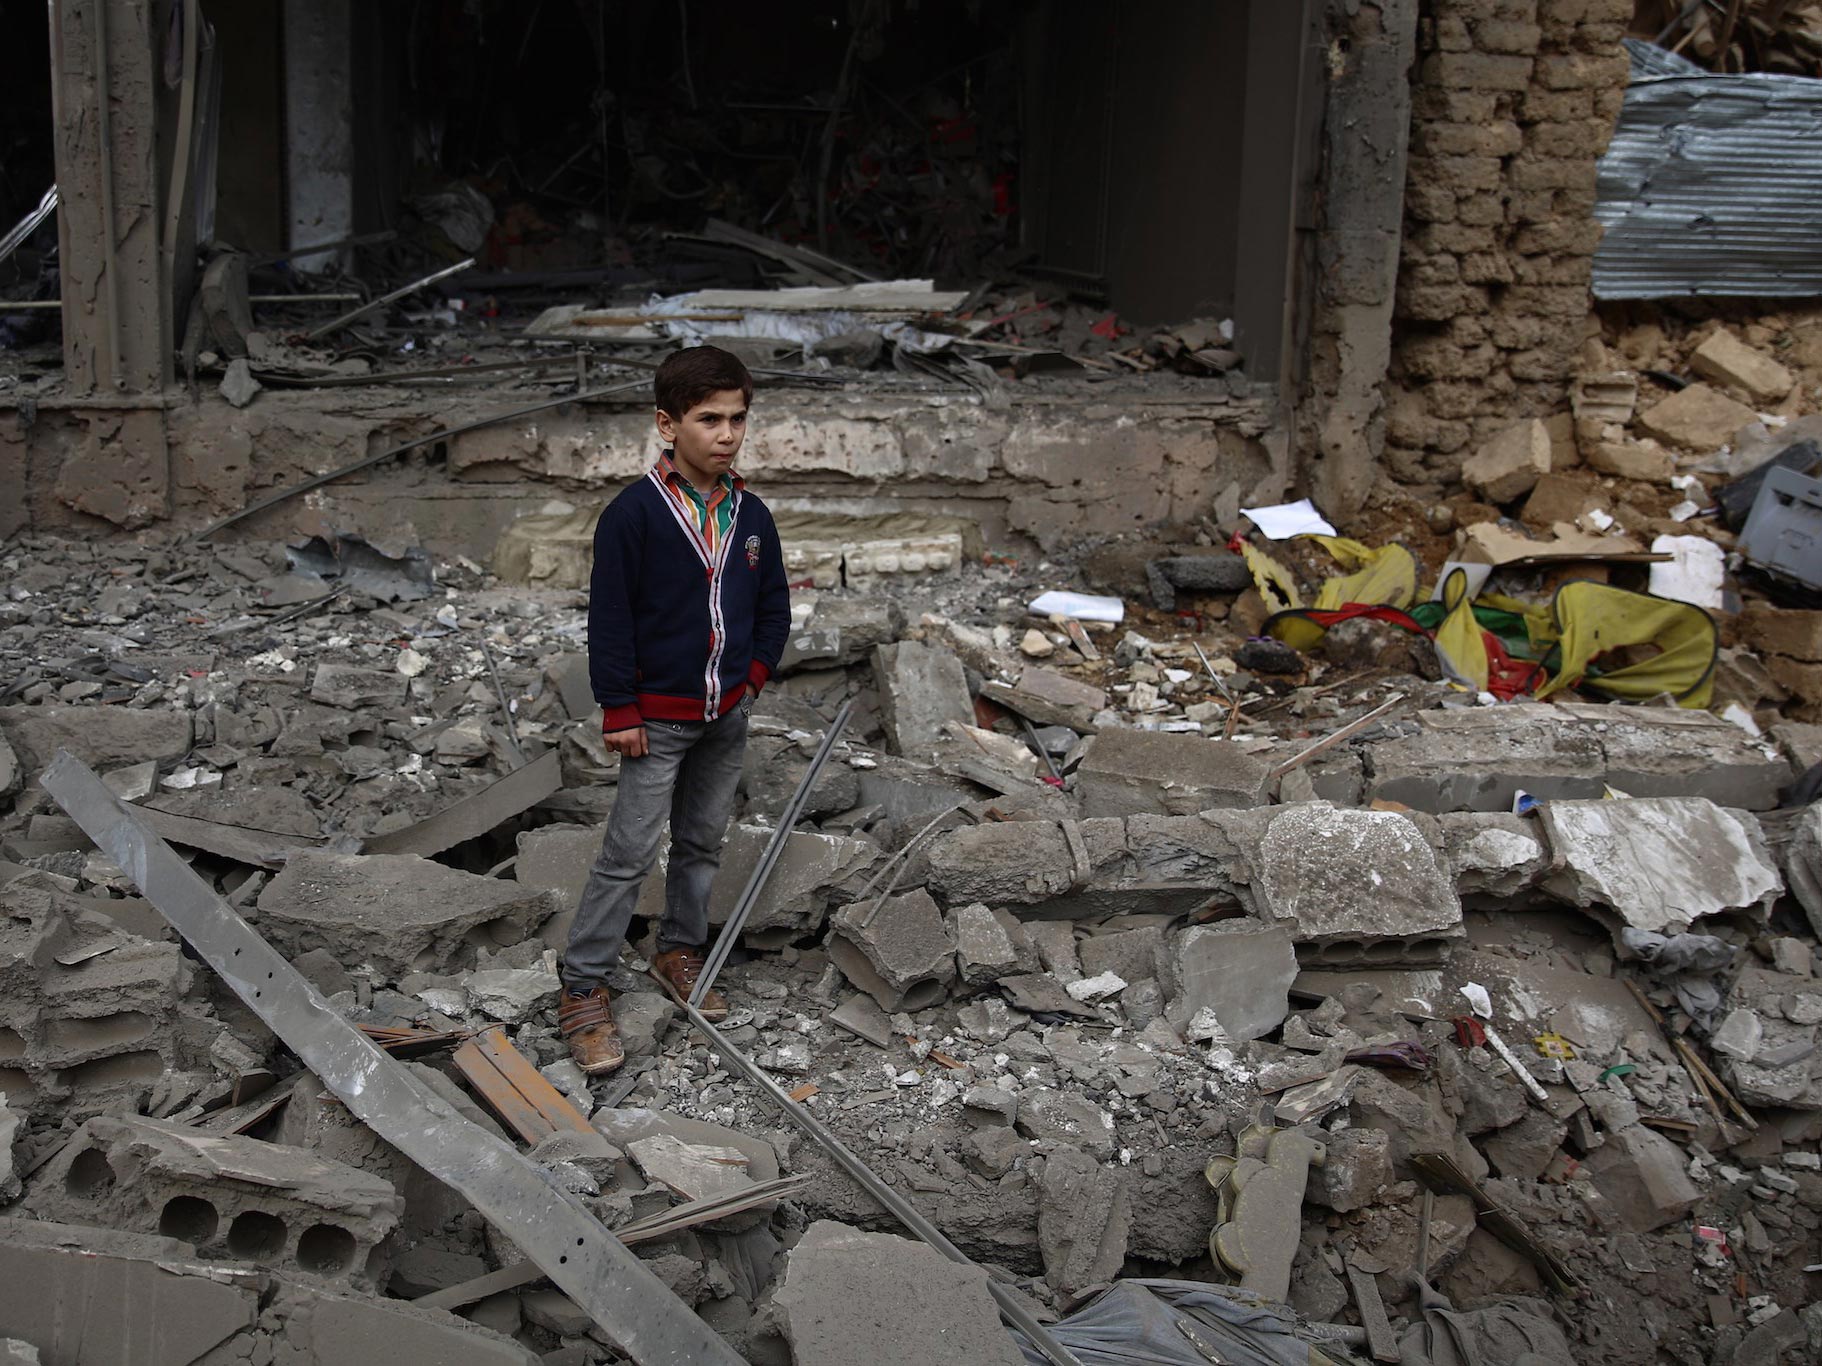 A young boy stands amid debris following a reported air strike in Syria